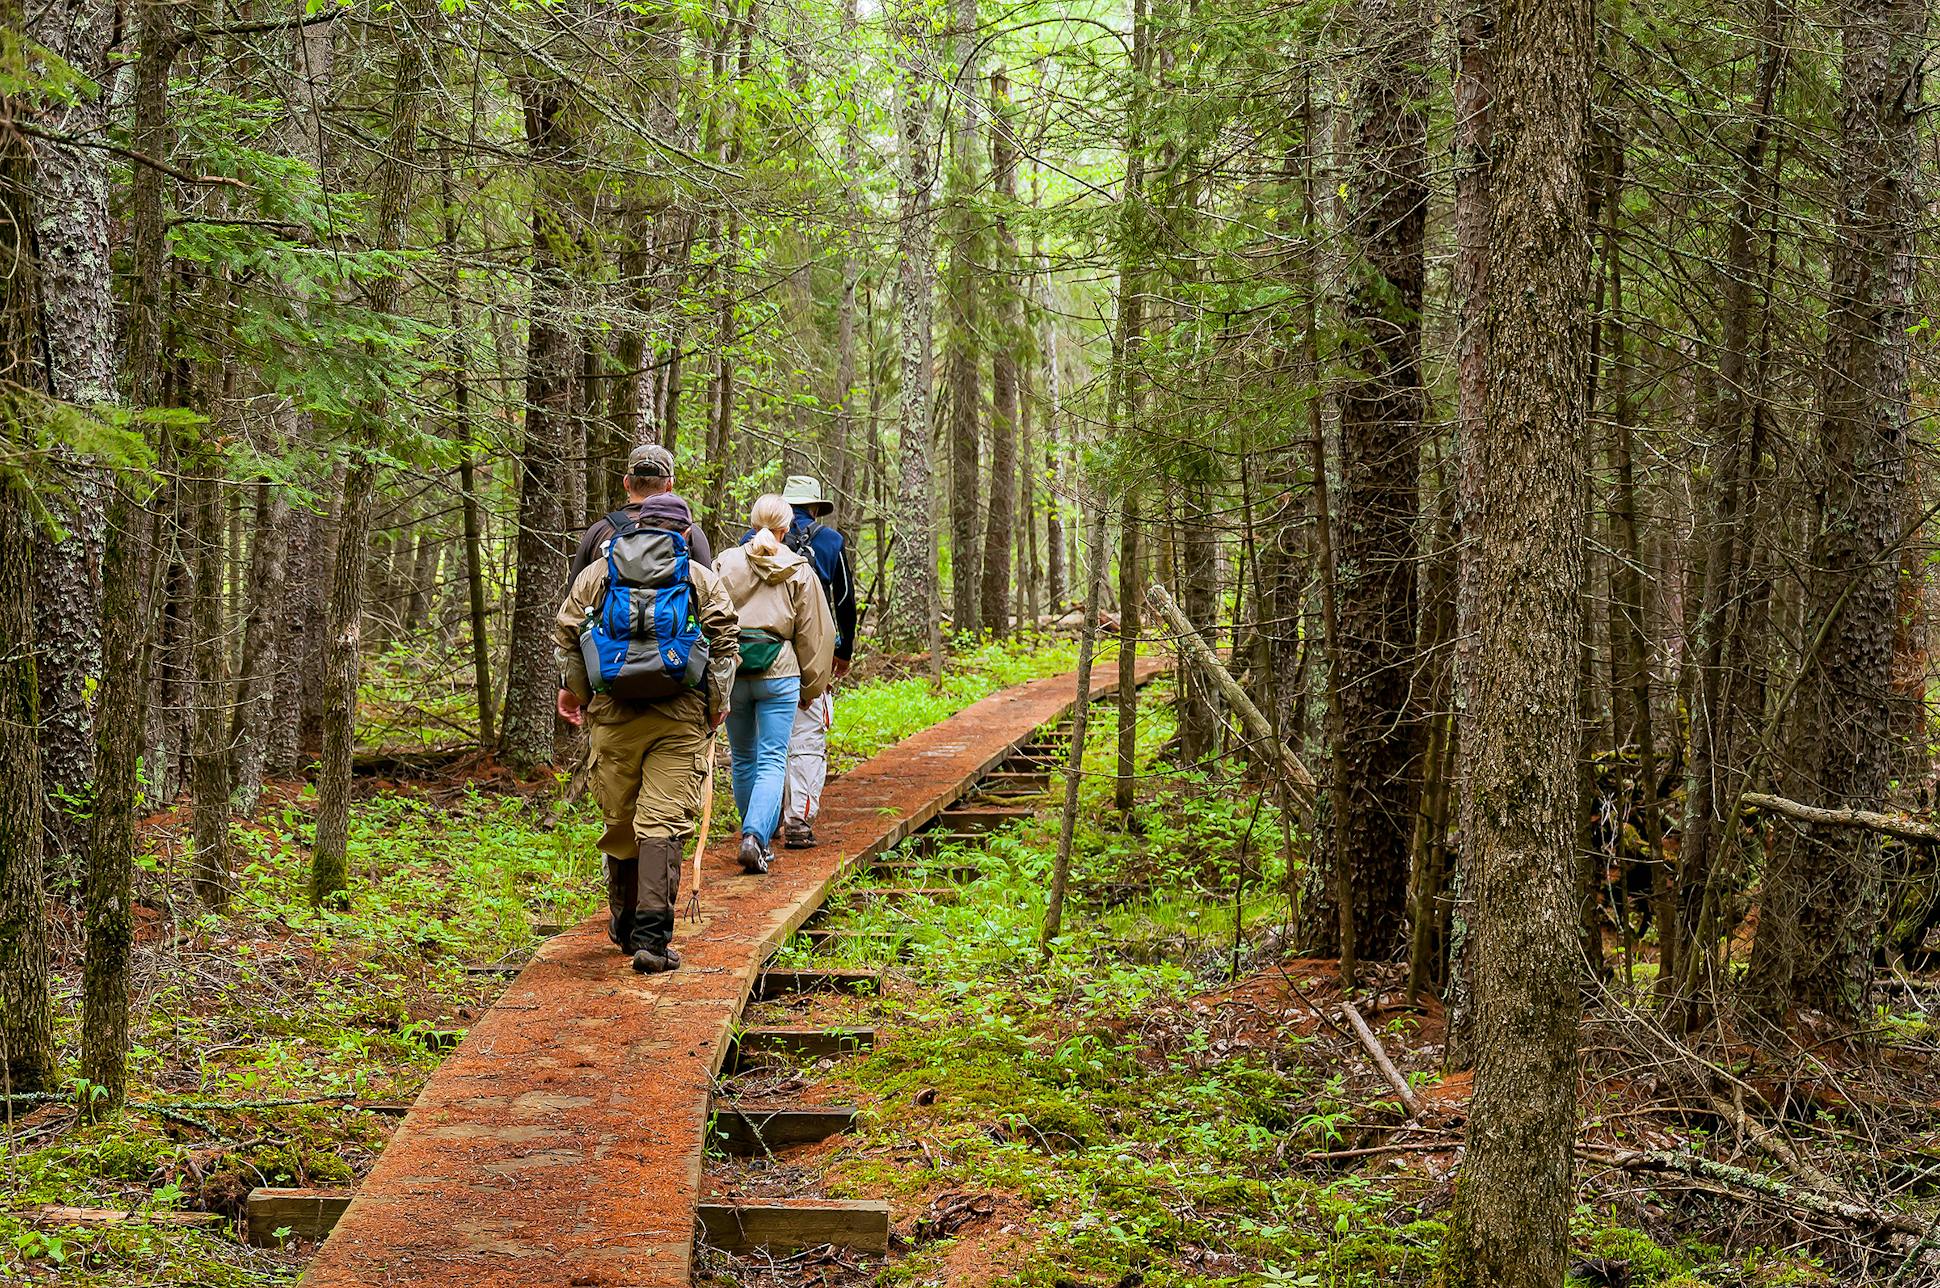 The North Country National Scenic Trail covers 800 miles in Minnesota. All told, the trail run 4,600 miles from North Dakota to upper New York State.